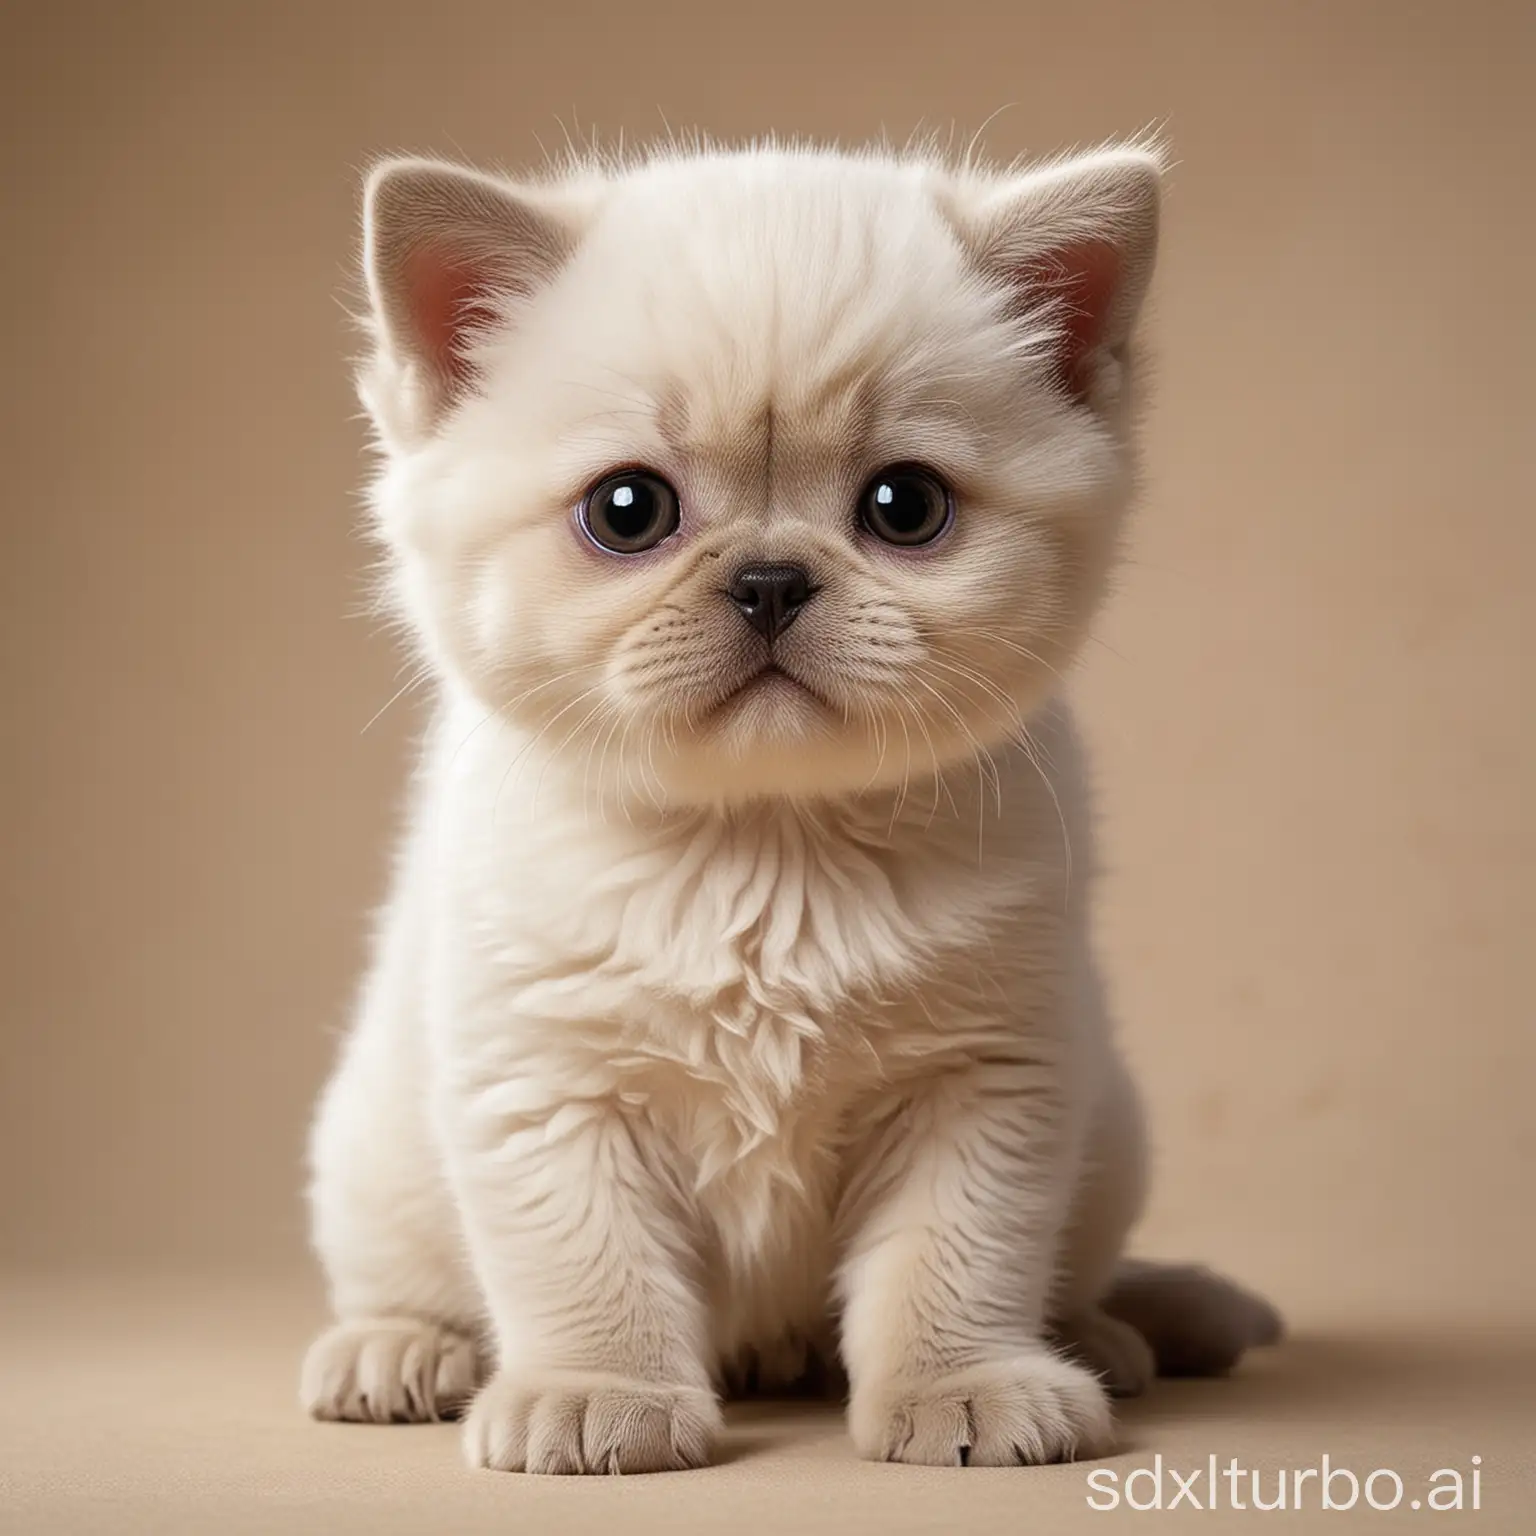 A kitten-like creature with a round face and large, expressive eyes like a British Shorthair cat. Its fur is short and plush, colored a creamy white like the cat breed. However, it has floppy ears hanging down like a King Charles Spaniel dog. Its body is compact like a cat but with slightly longer legs reminiscent of the dog breed. The hybrid kitten has a short snout and a small black nose. Its expression is inquisitive and friendly, with a hint of the gentle demeanor associated with both parent breeds. The lighting is soft and warm, highlighting the kitten's unique features against a slightly blurred background. The overall image conveys a sense of whimsy and the unexpected blending of feline and canine traits into an imaginative new 'breed.'